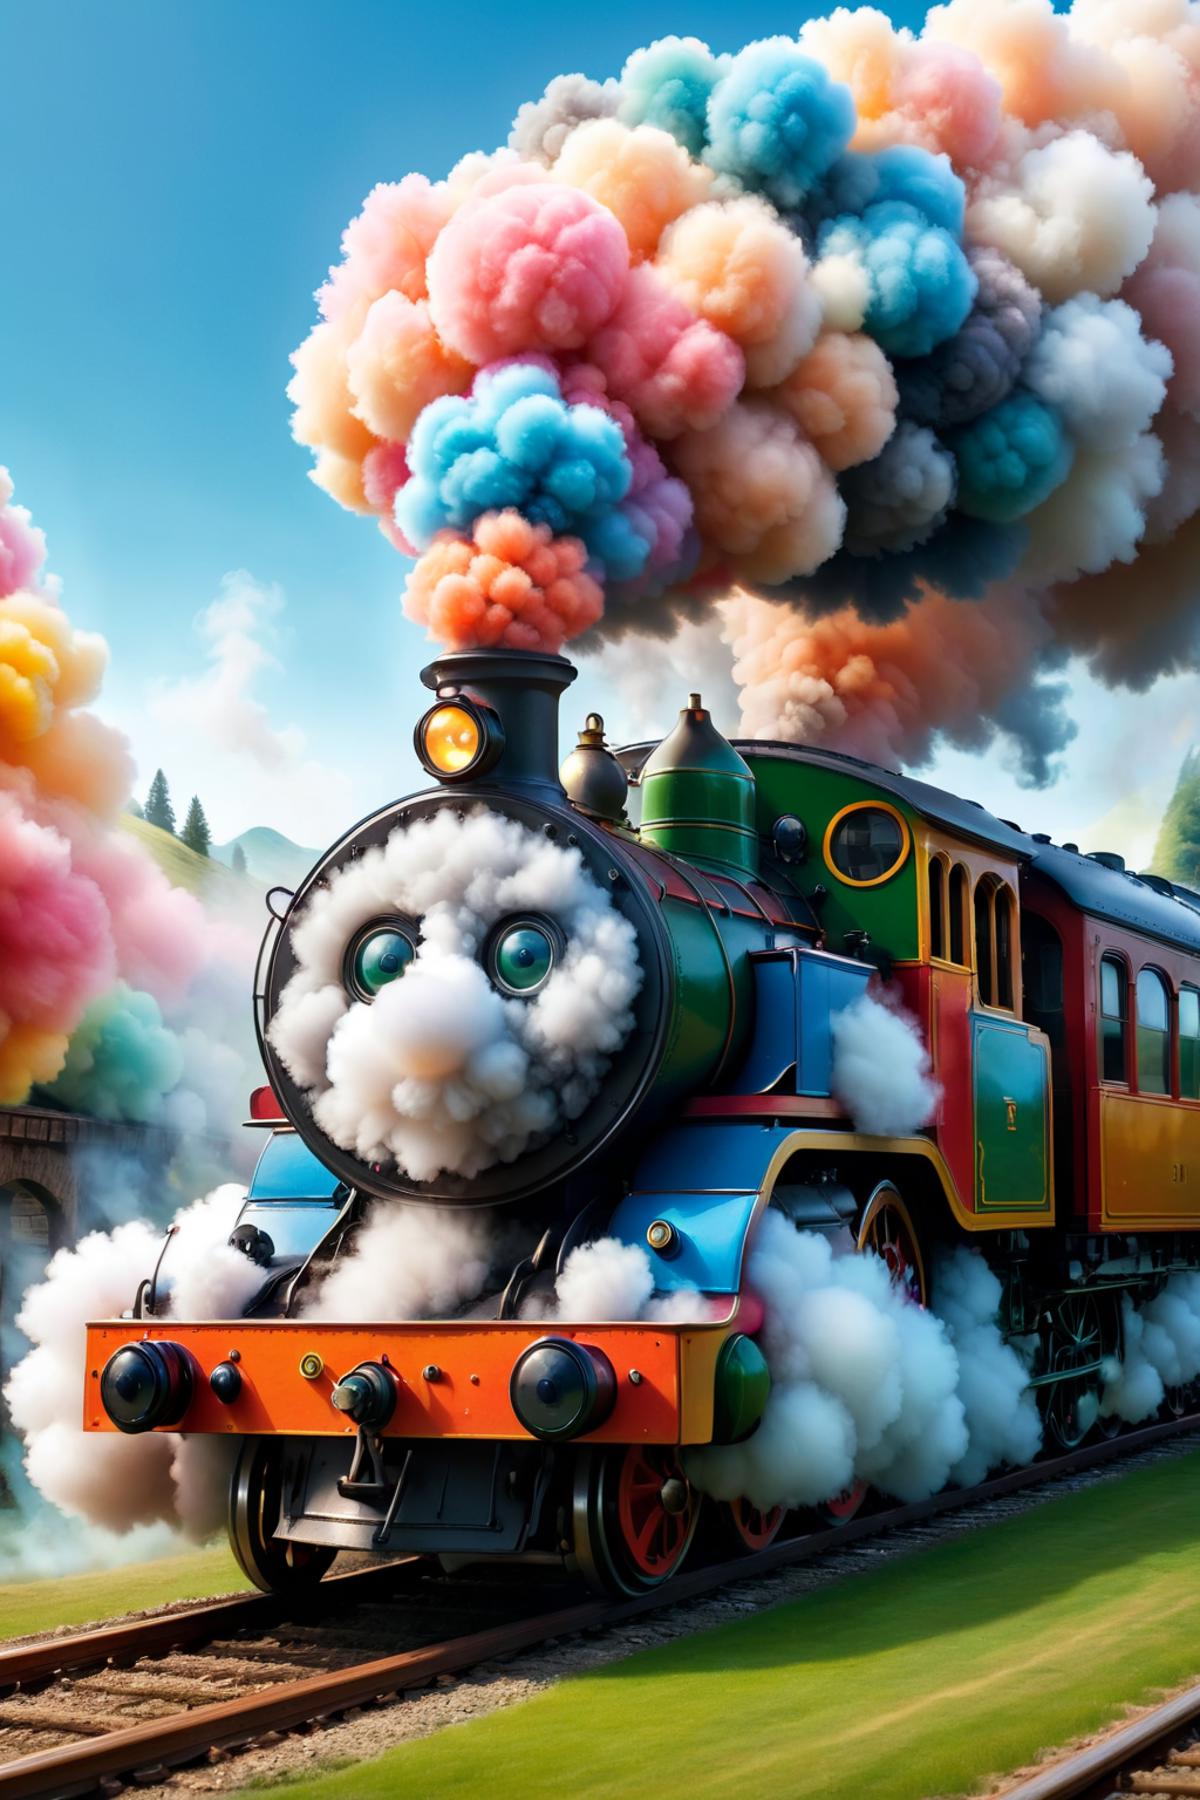 Colorful cartoon train with smoke billowing out of the engine.